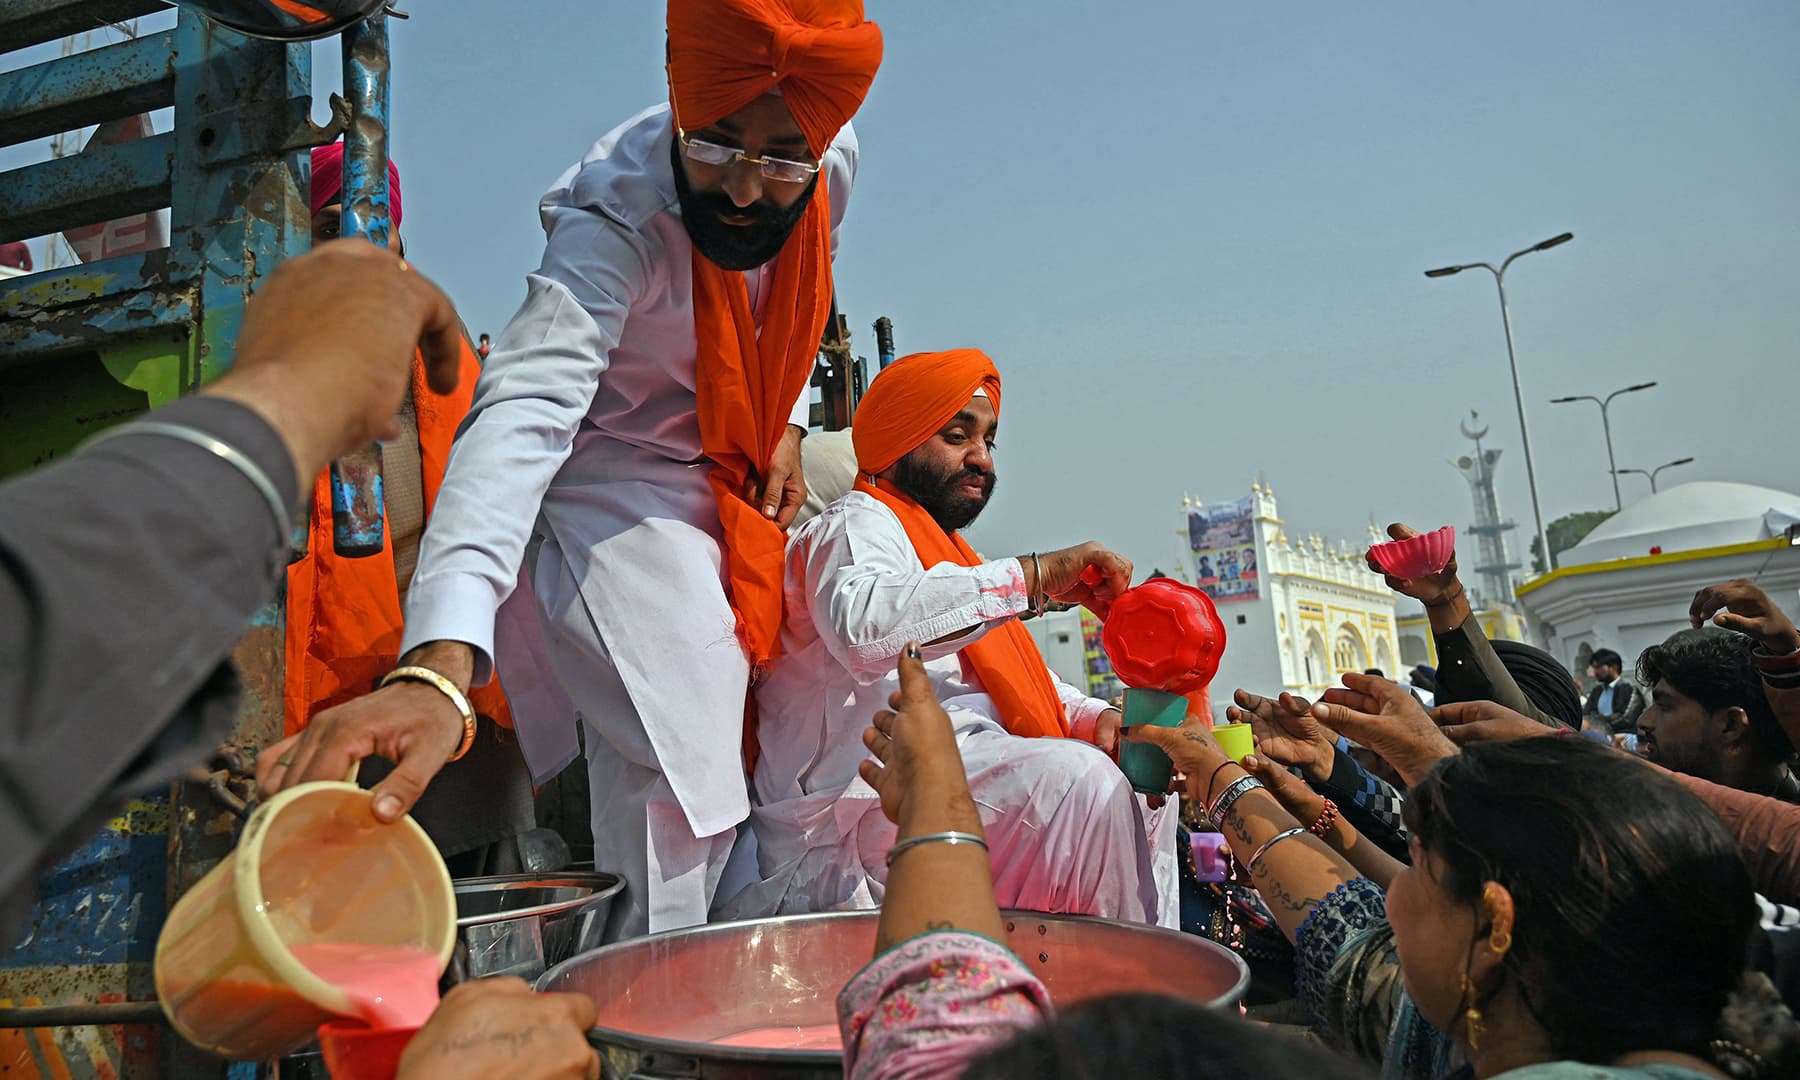 Sikh devotees distribute sweet drinks during a religious procession on the occasion of the birth anniversary of Guru Nanak Dev in Nankana Sahib on November 19. — AFP